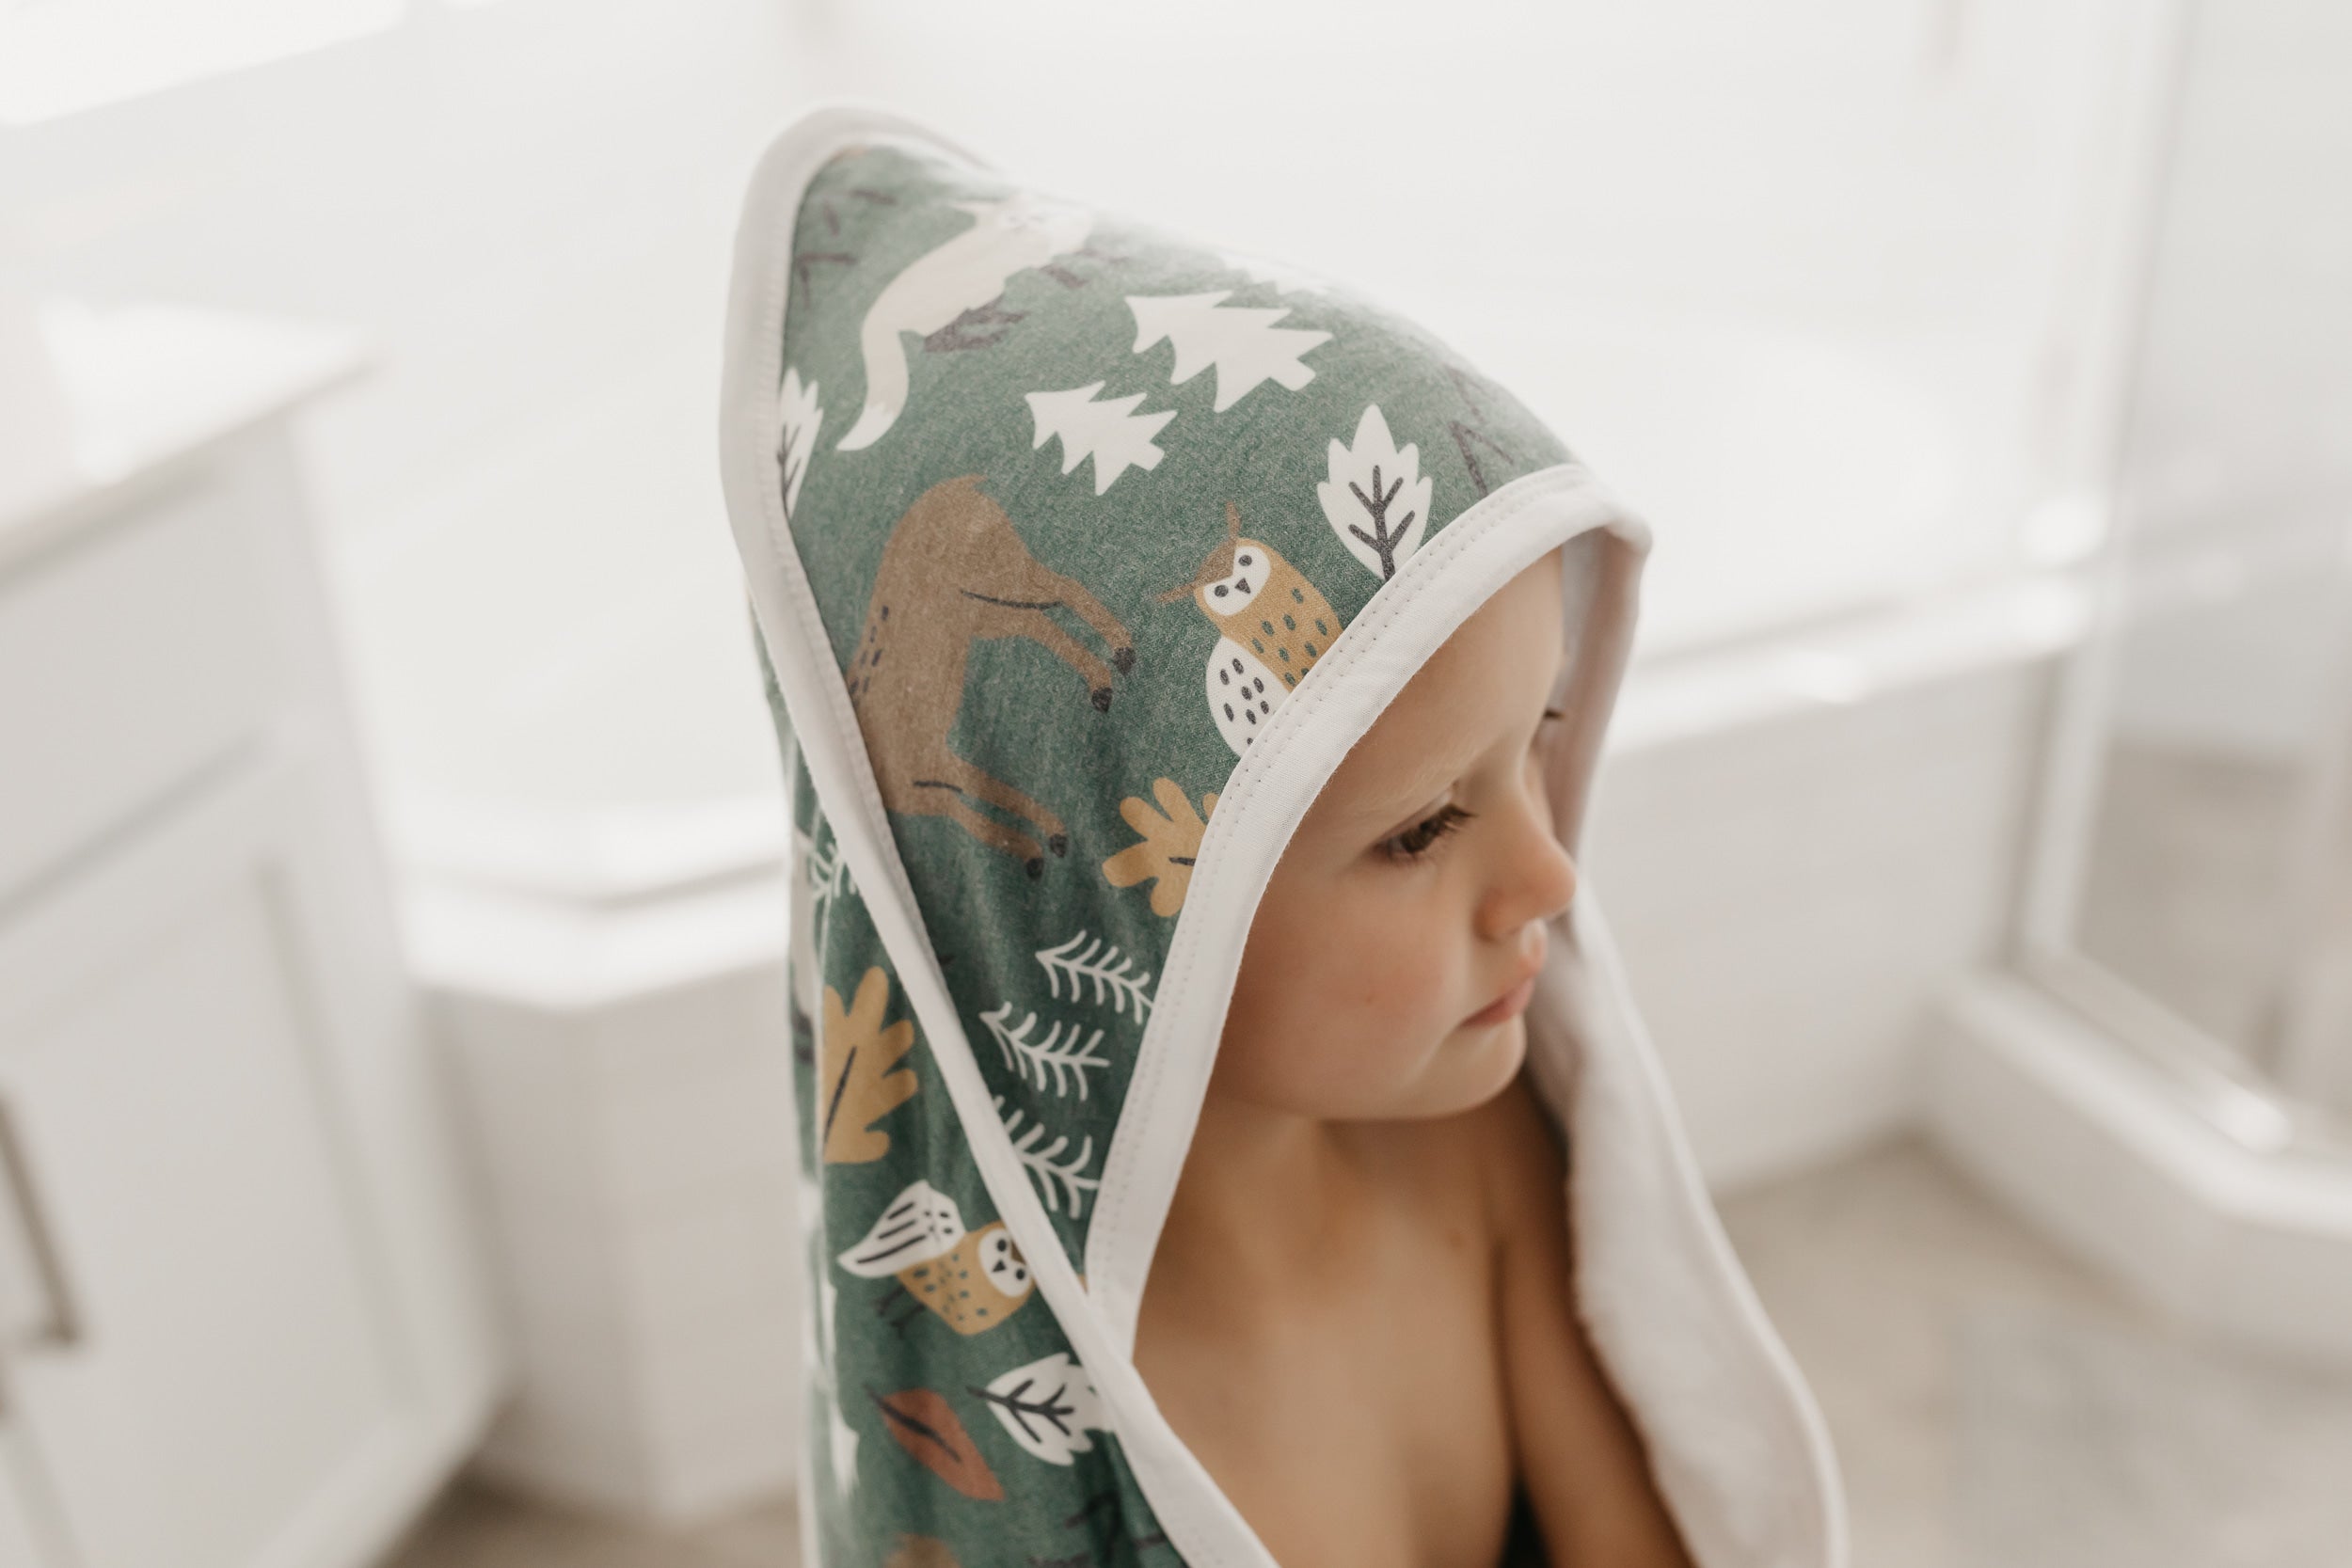 Premium Knit Hooded Towel - Atwood